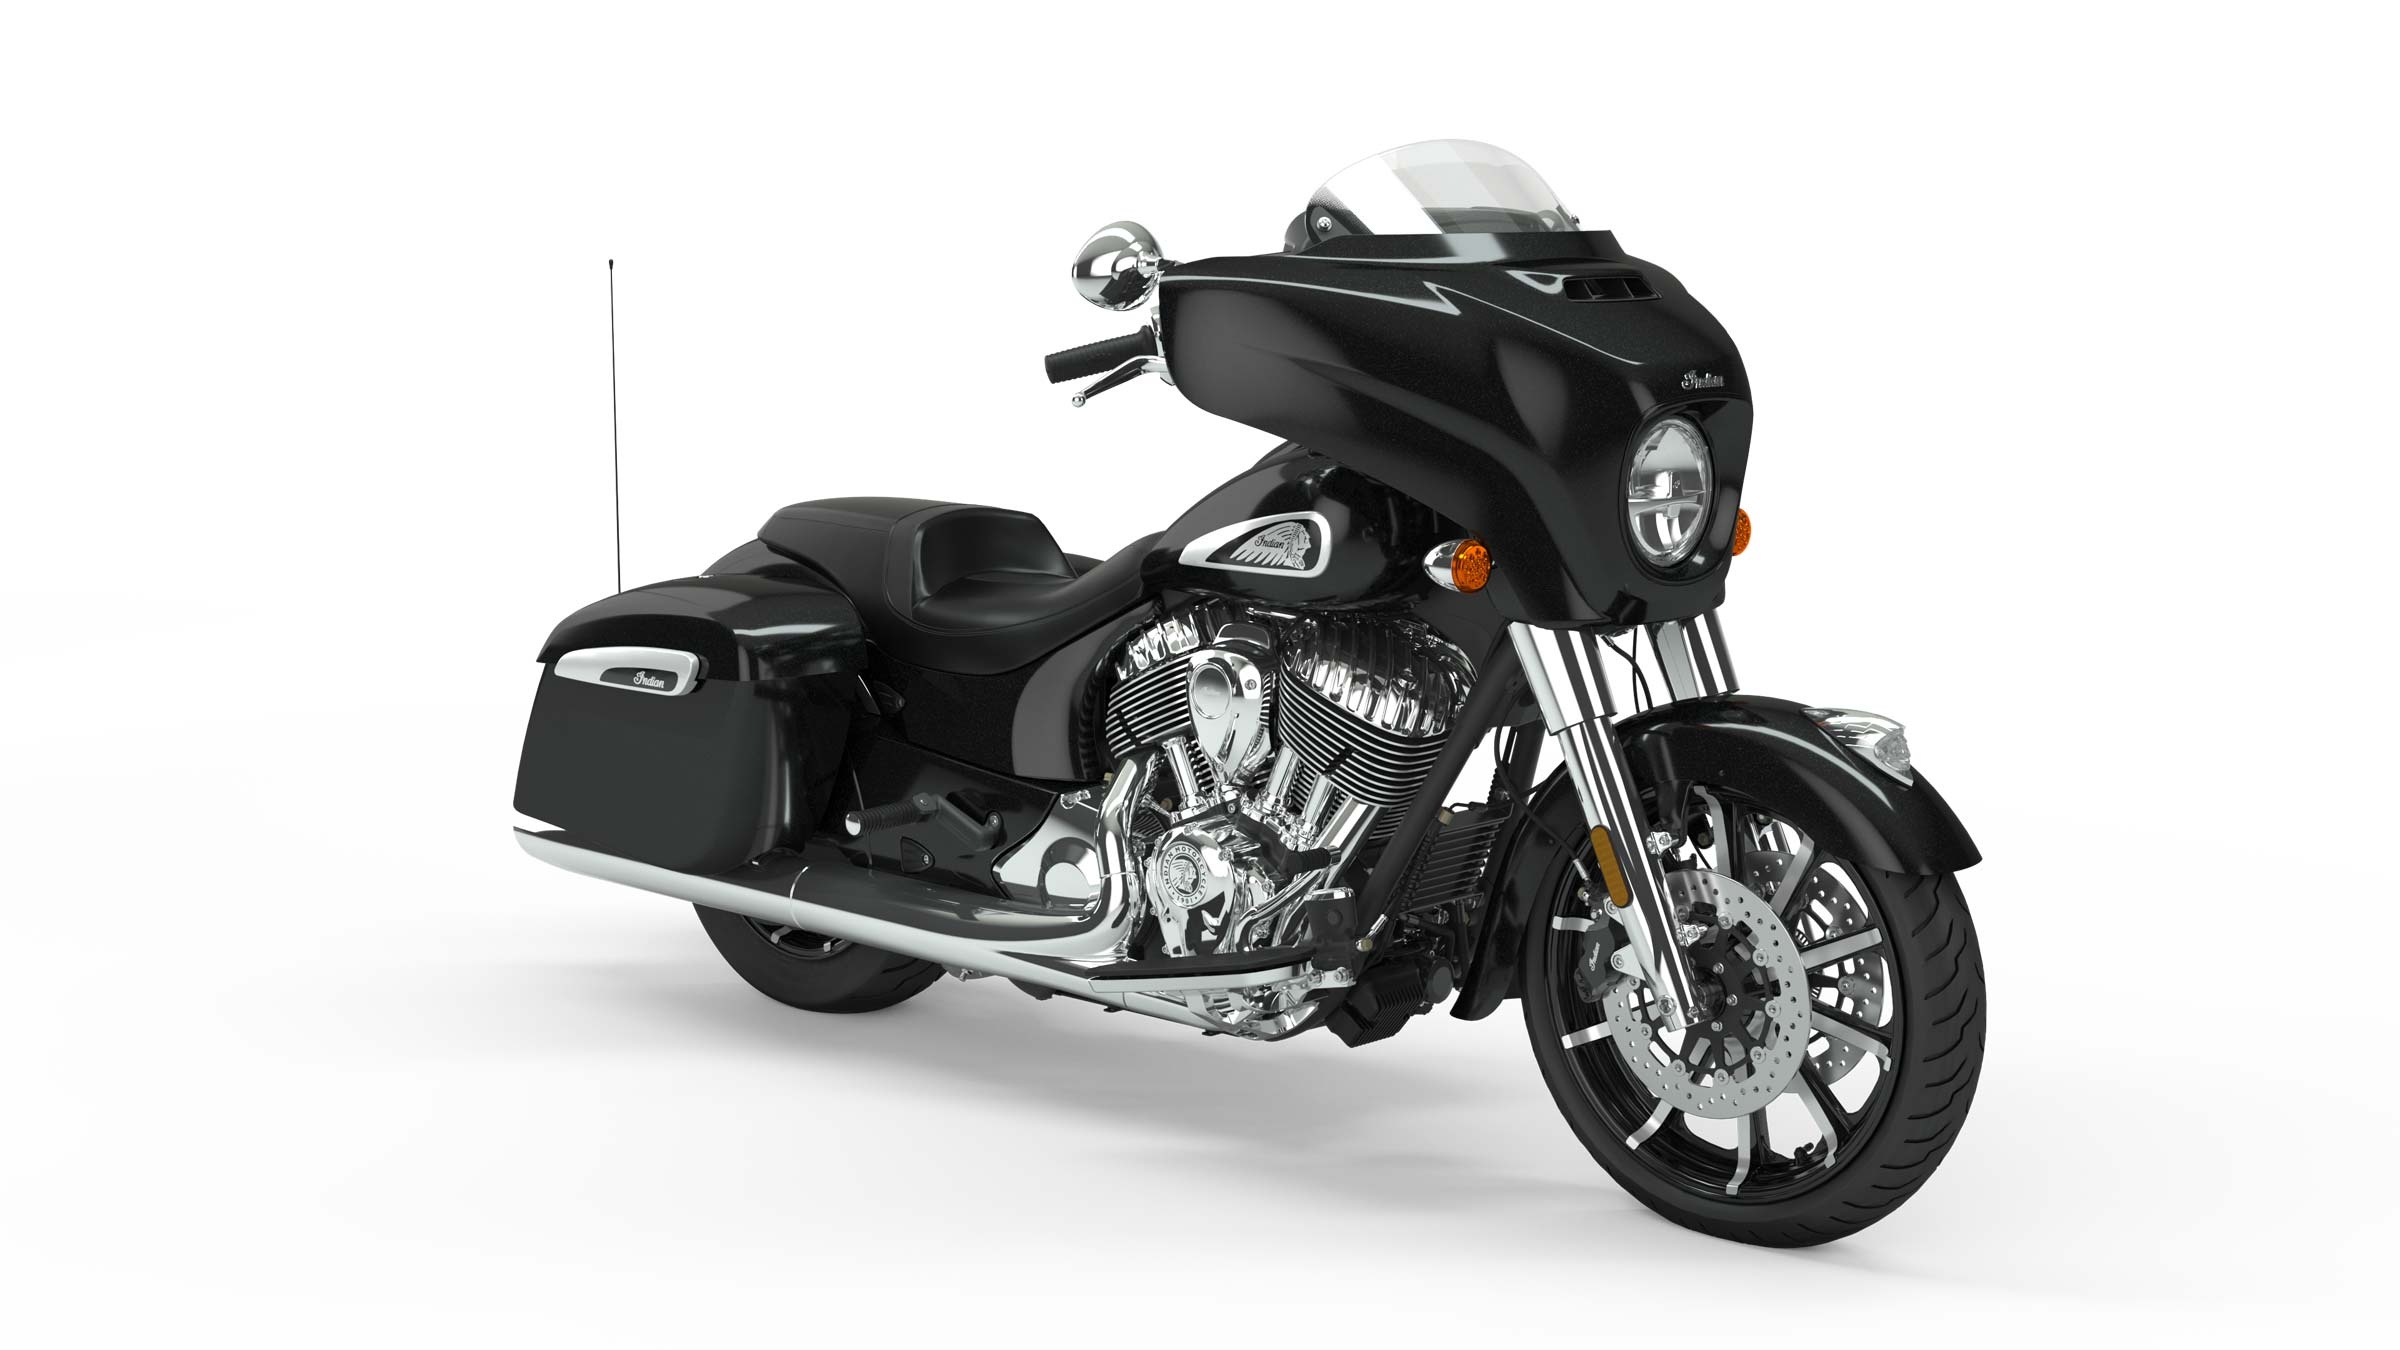 Indian Chieftain Limited, Striking visuals, Free wallpaper download, Auto enthusiasts, 2400x1350 HD Desktop